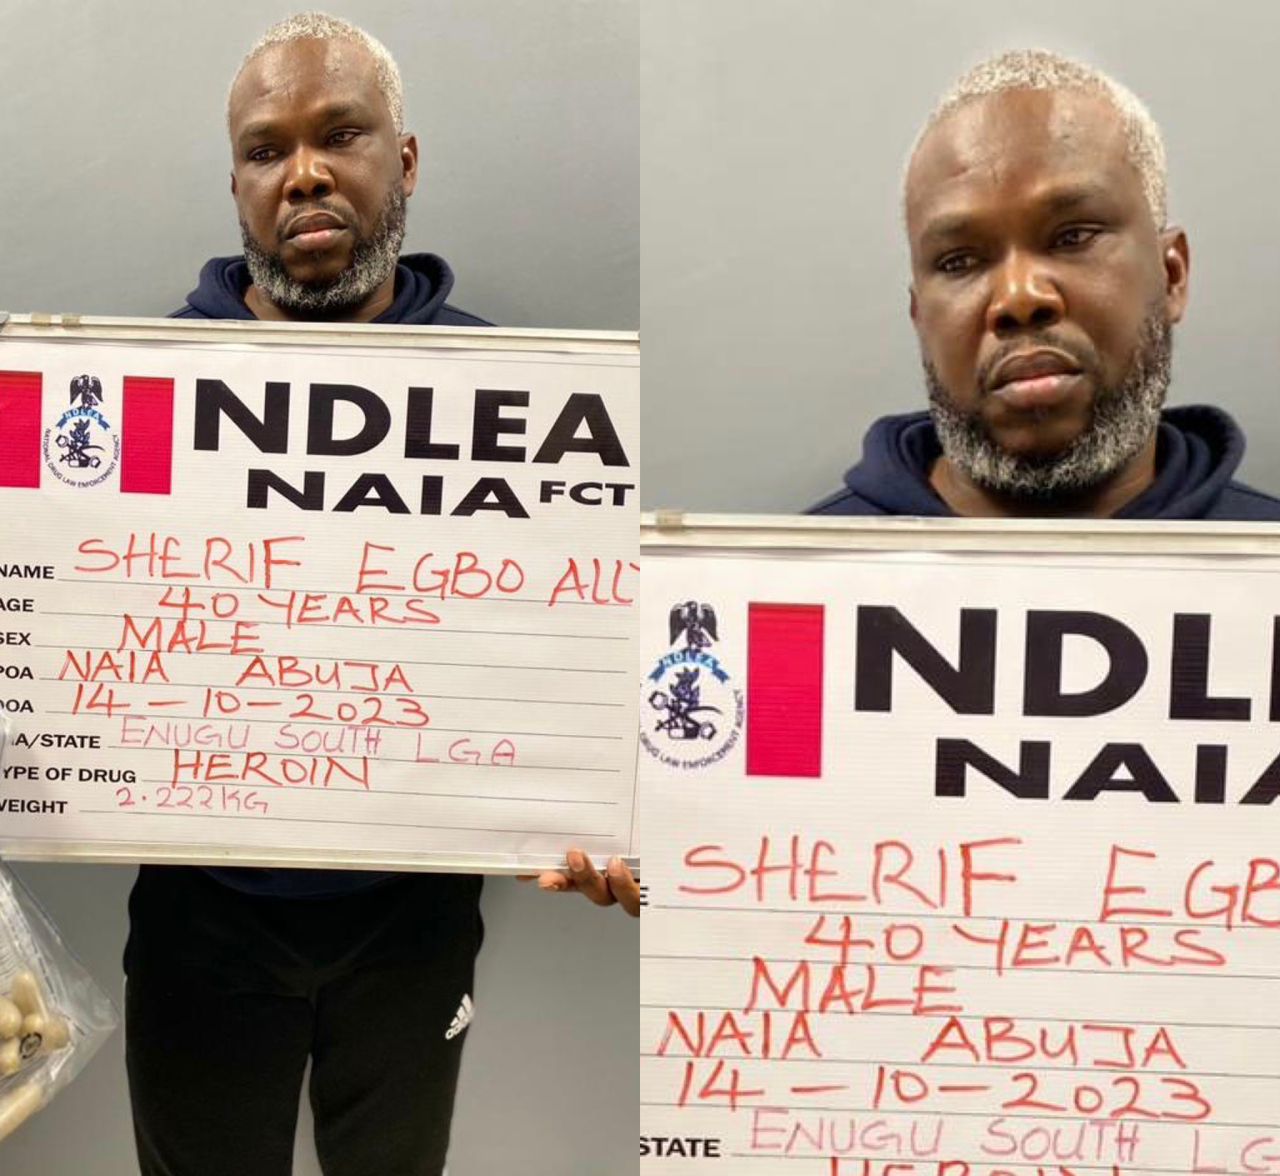 Spain based mostly businessman excretes 93 wraps of heroin at Abuja airport